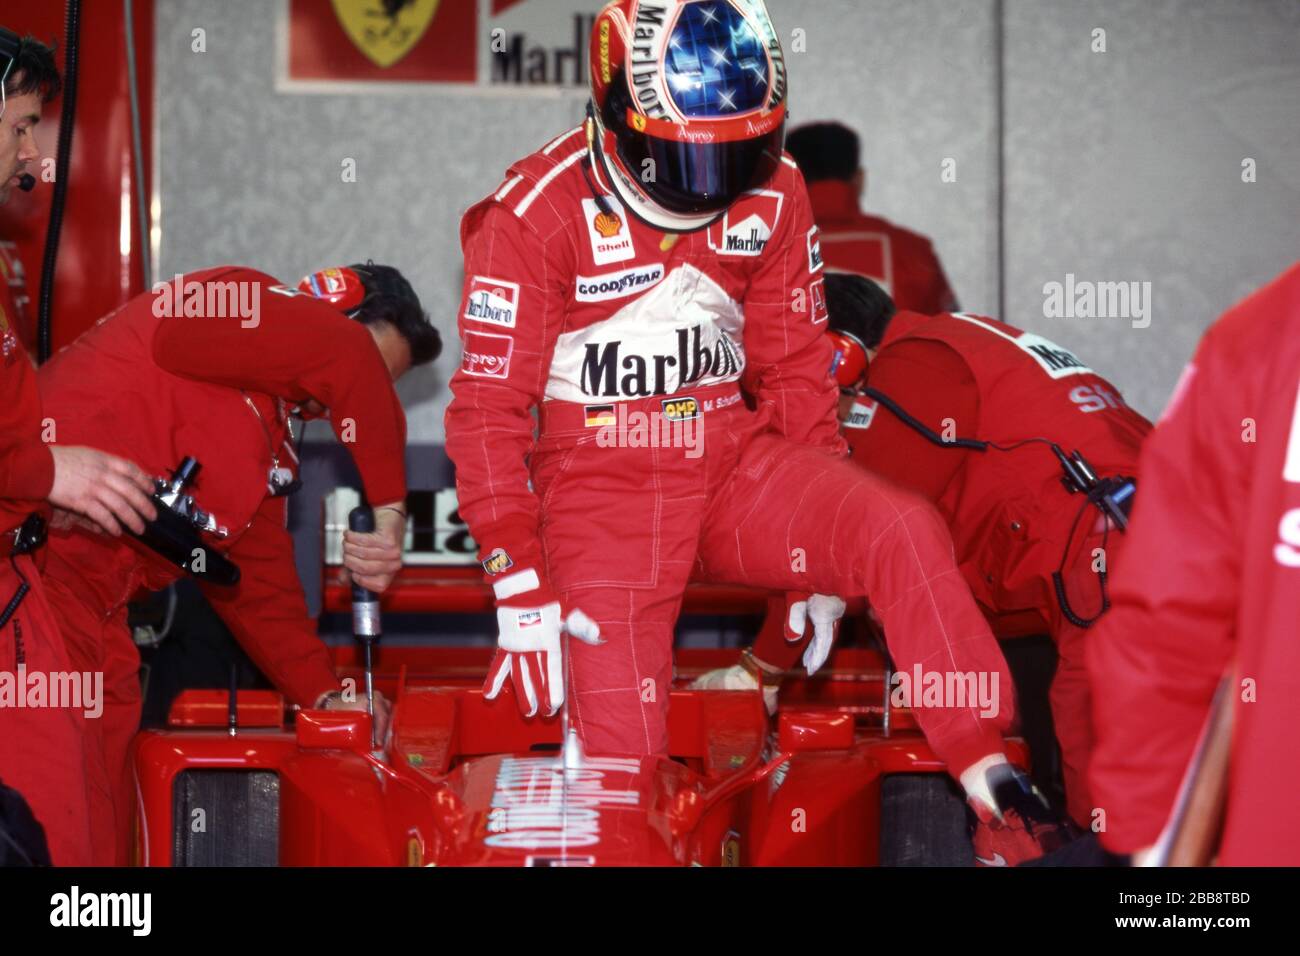 firo: Formula 1, season 1997 Sport, Motorsport, Formula 1, archive, archive pictures Team Ferrari (1996-2006) Michael Schumacher, Germany, was a Formula 1 driver from 1991 to 2006 and 2010 to 2012, Schumacher was 7, seven times, Formula 1, world champion, German national hero, brought Formula 1 after Germany, one of the largest Germans, 1st season at Ferrari Michael Schumacher, half figure, gets out of his car | usage worldwide Stock Photo